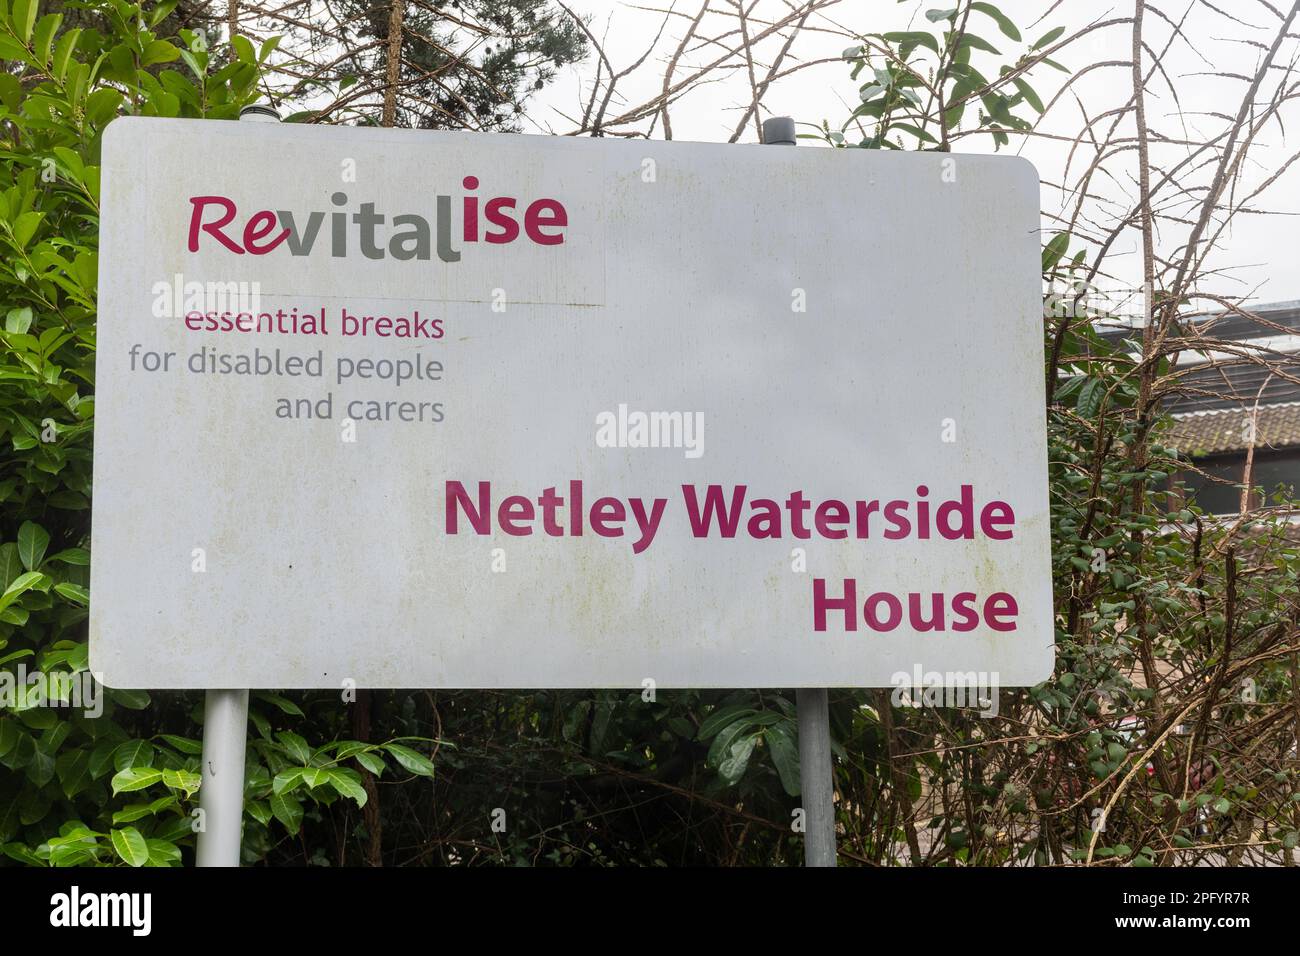 Revitalise Netley Waterside House, a care home offering breaks for disabled people and carers, Netley, Hampshire, England, UK Stock Photo